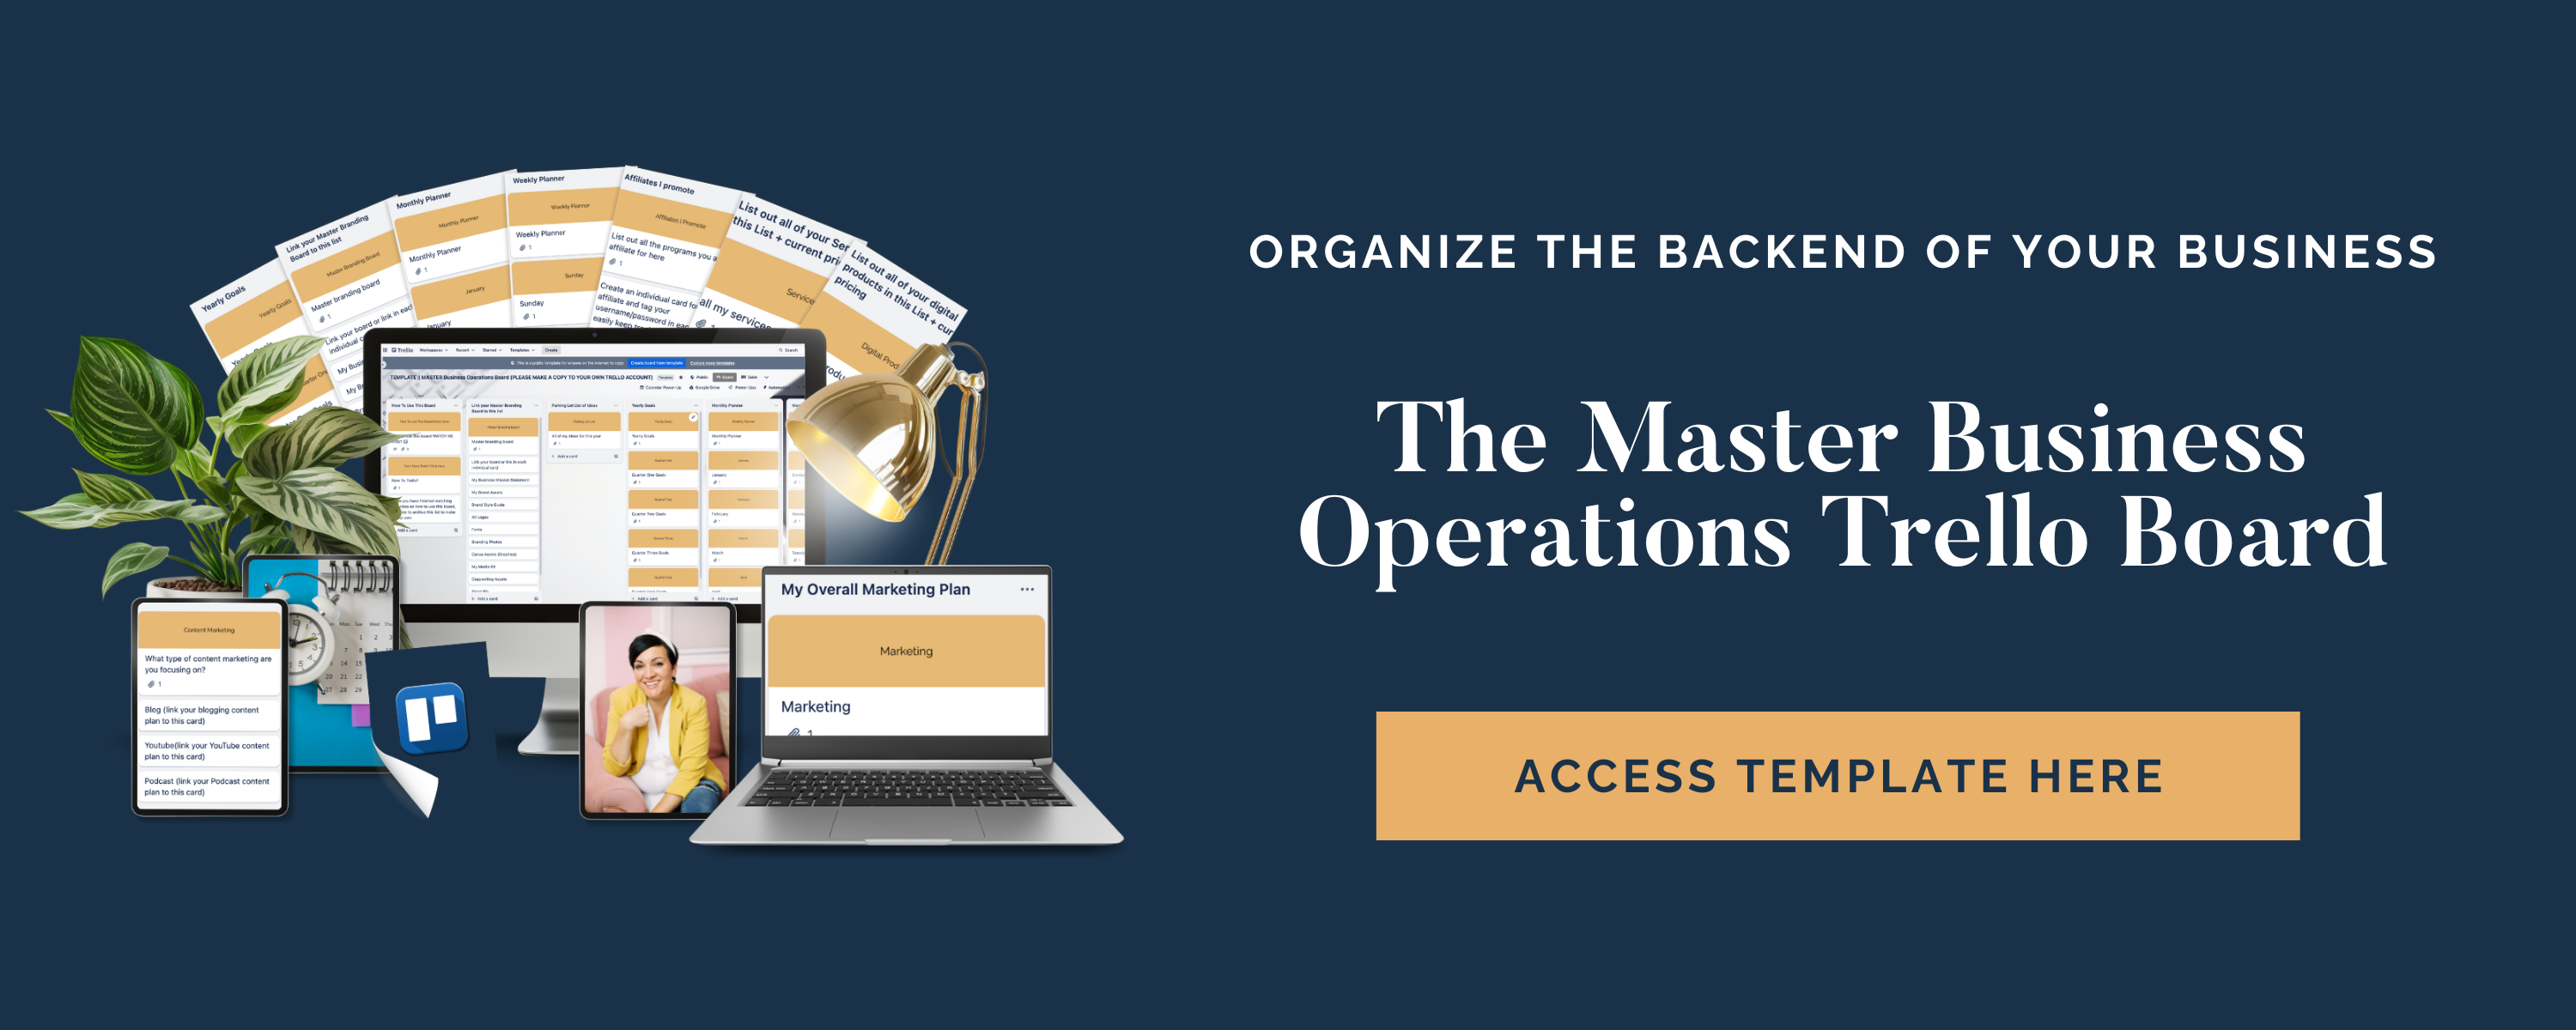 The_Master_Business_Operations_Board_by_Dolly_DeLong_Education